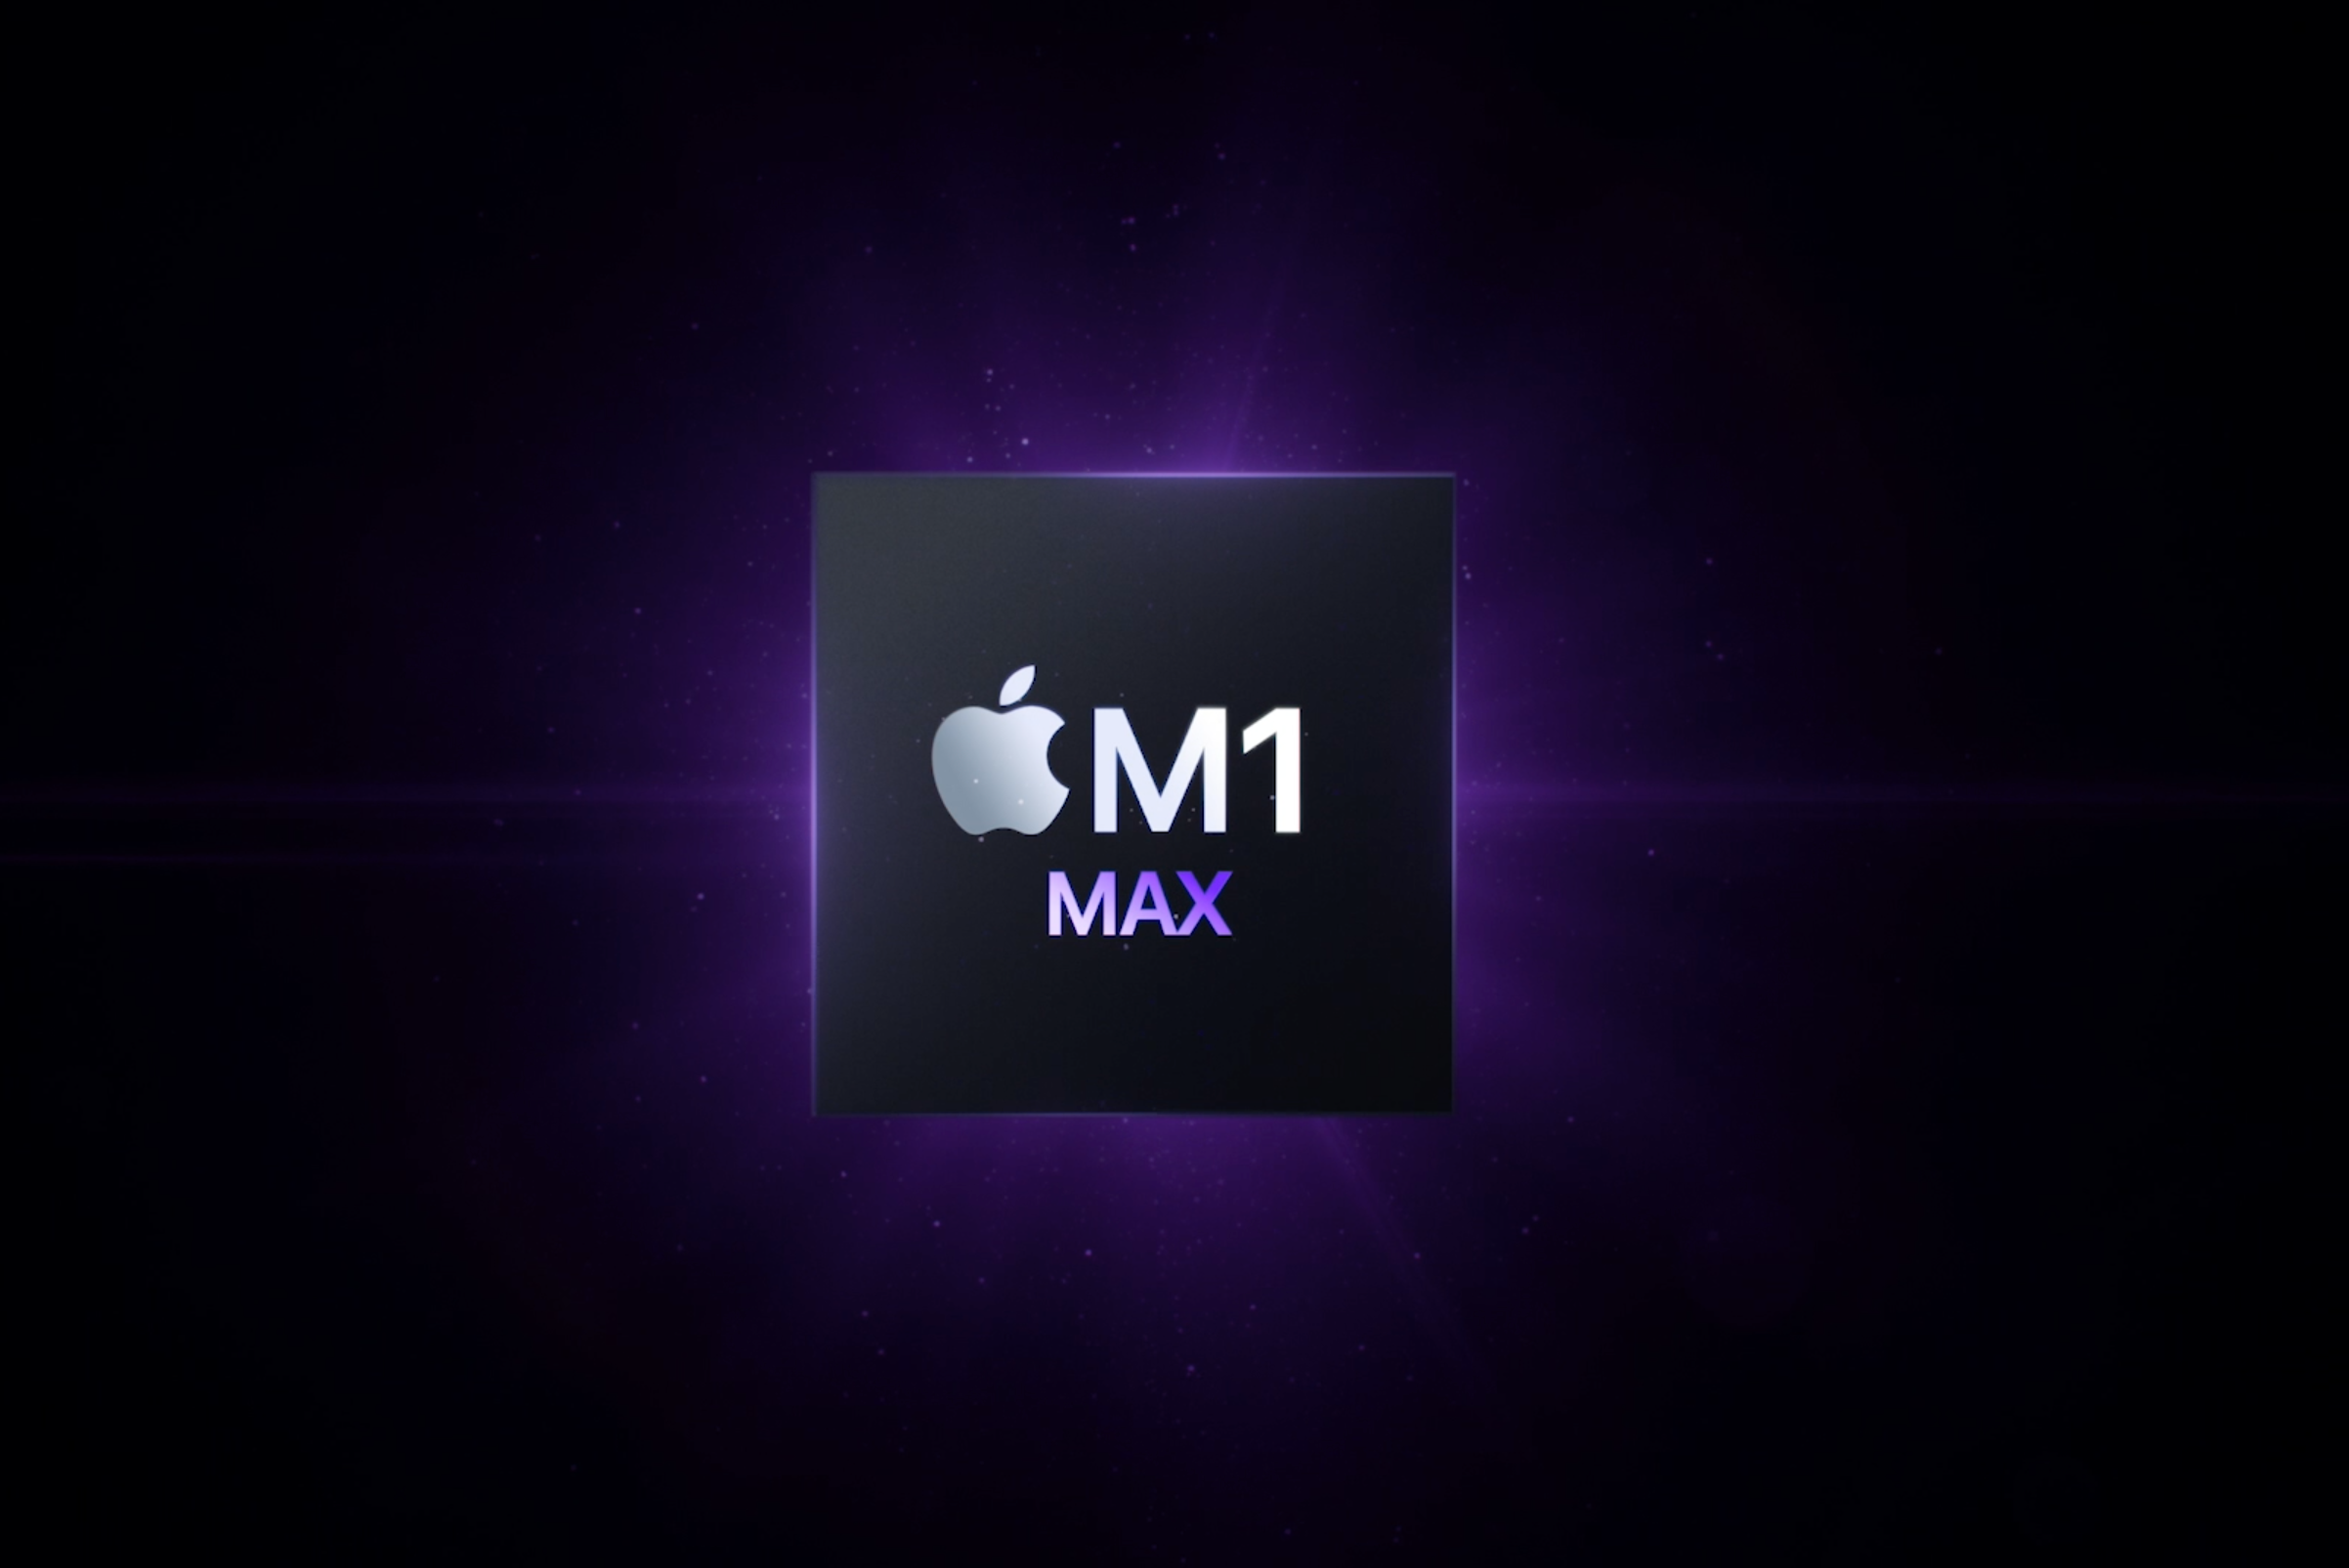 The Mac Pro could have an even more powerful chip than Apple M1 Max